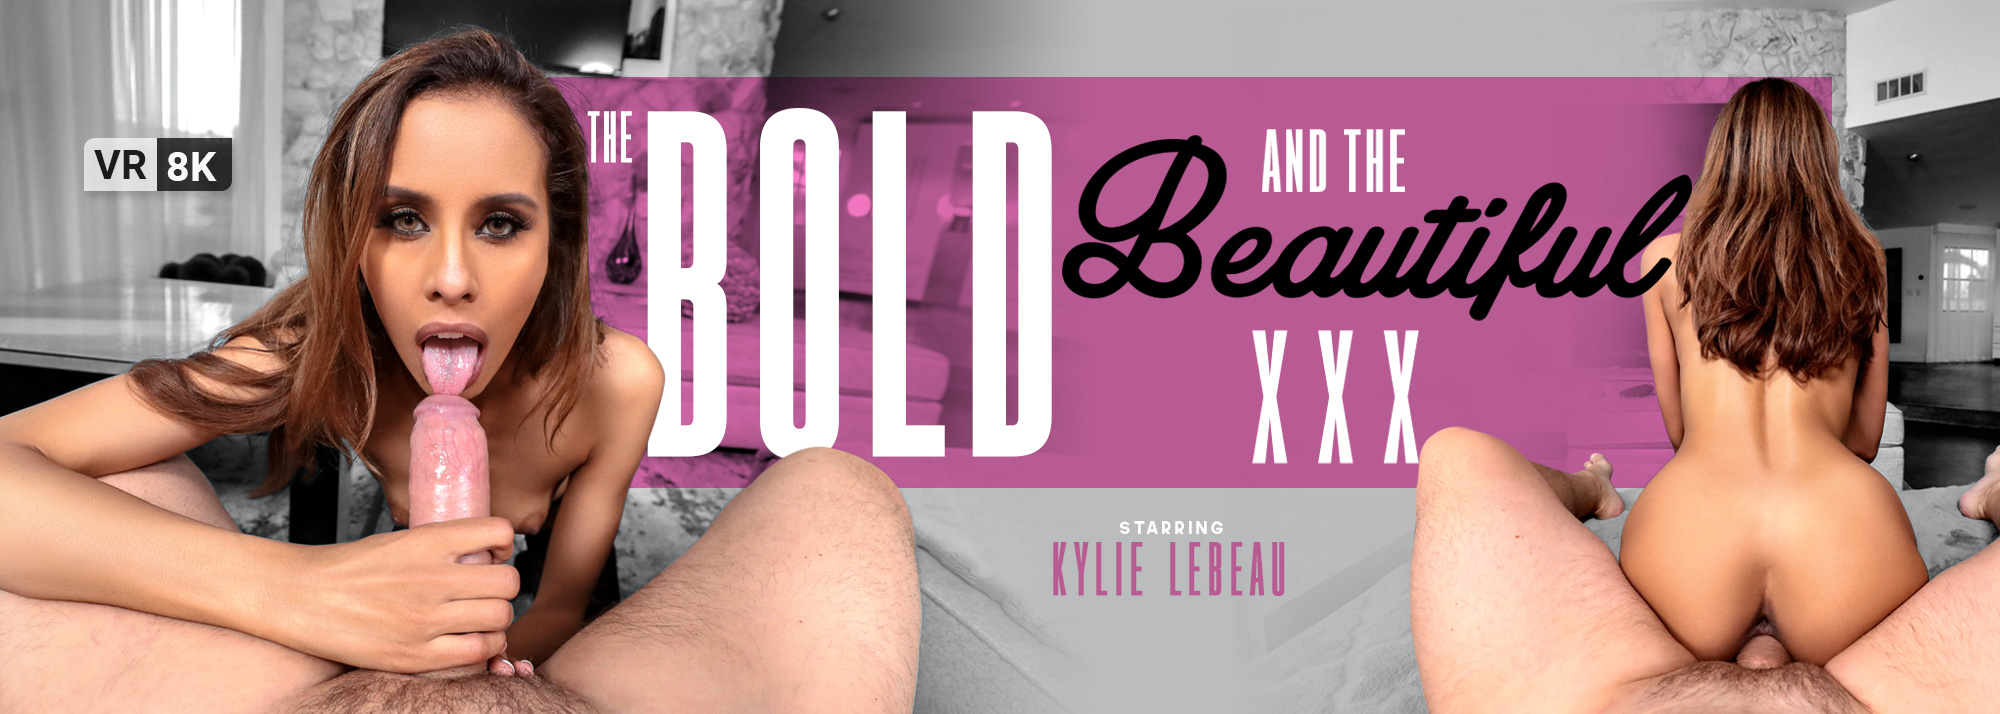 The Bold and The Beautiful XXX - VR Porn Video, Starring: Kylie Le Beau